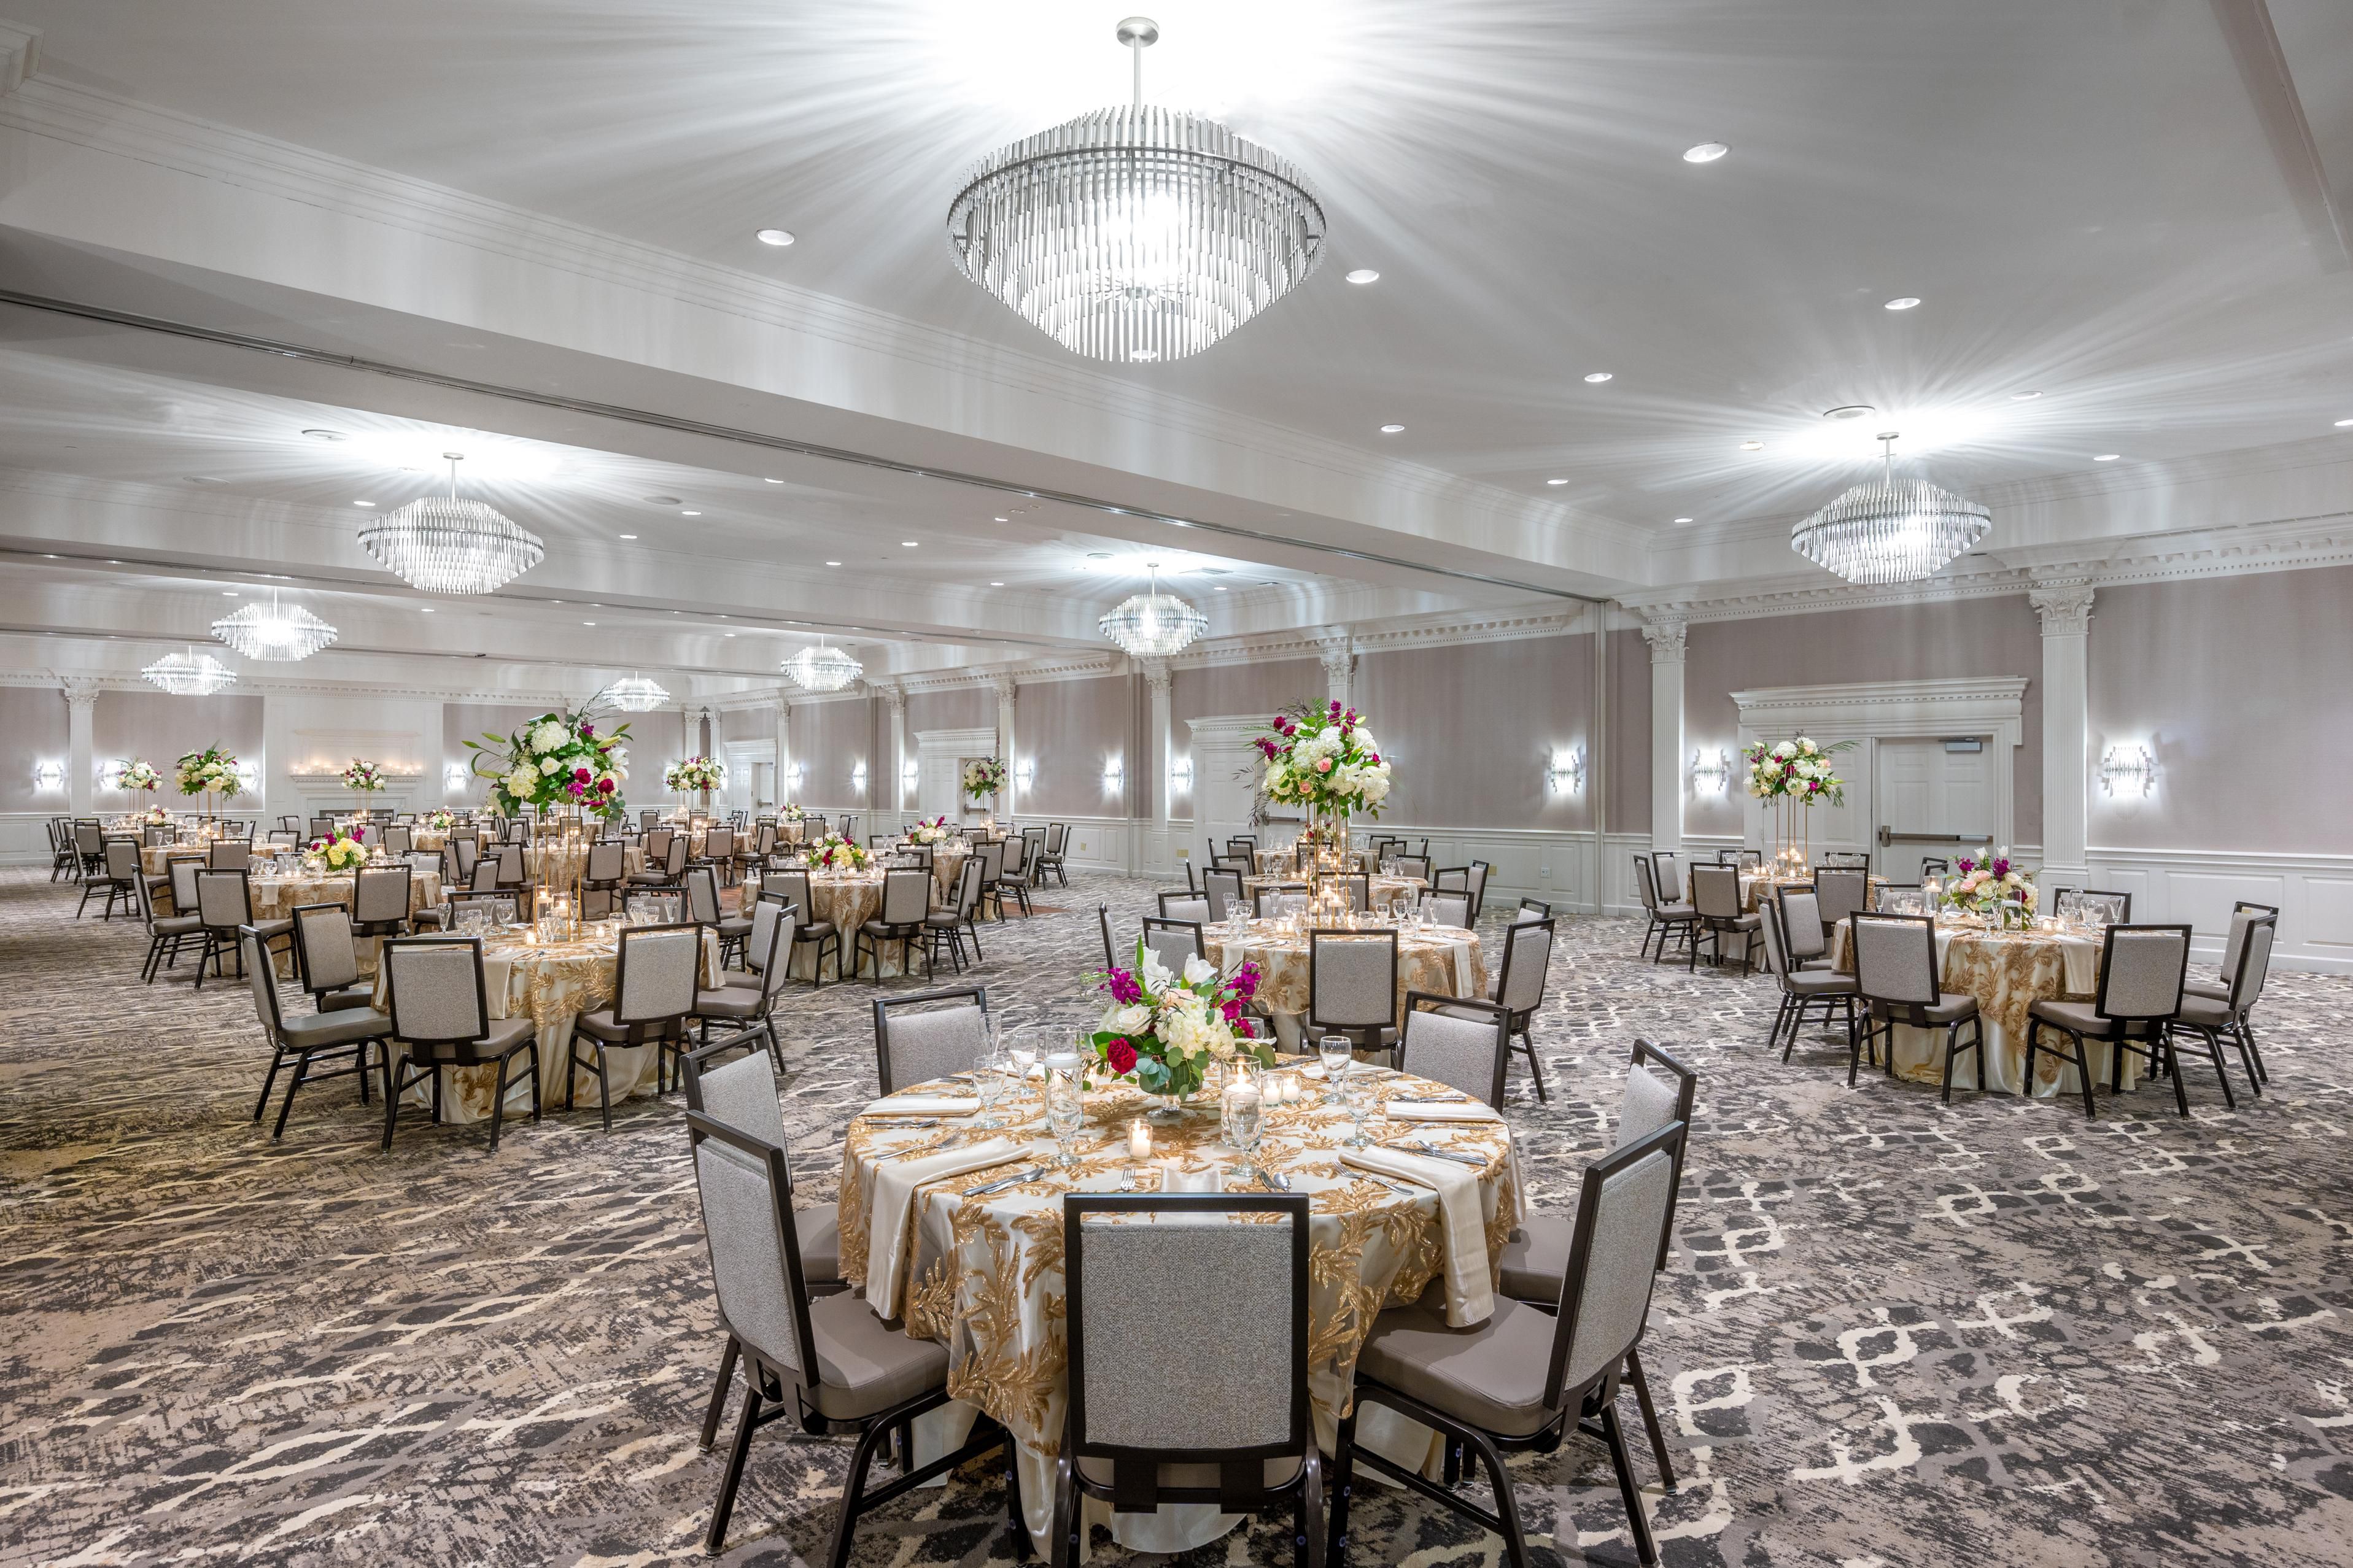 King Street Ballroom fits 540 guests, perfect for any social event